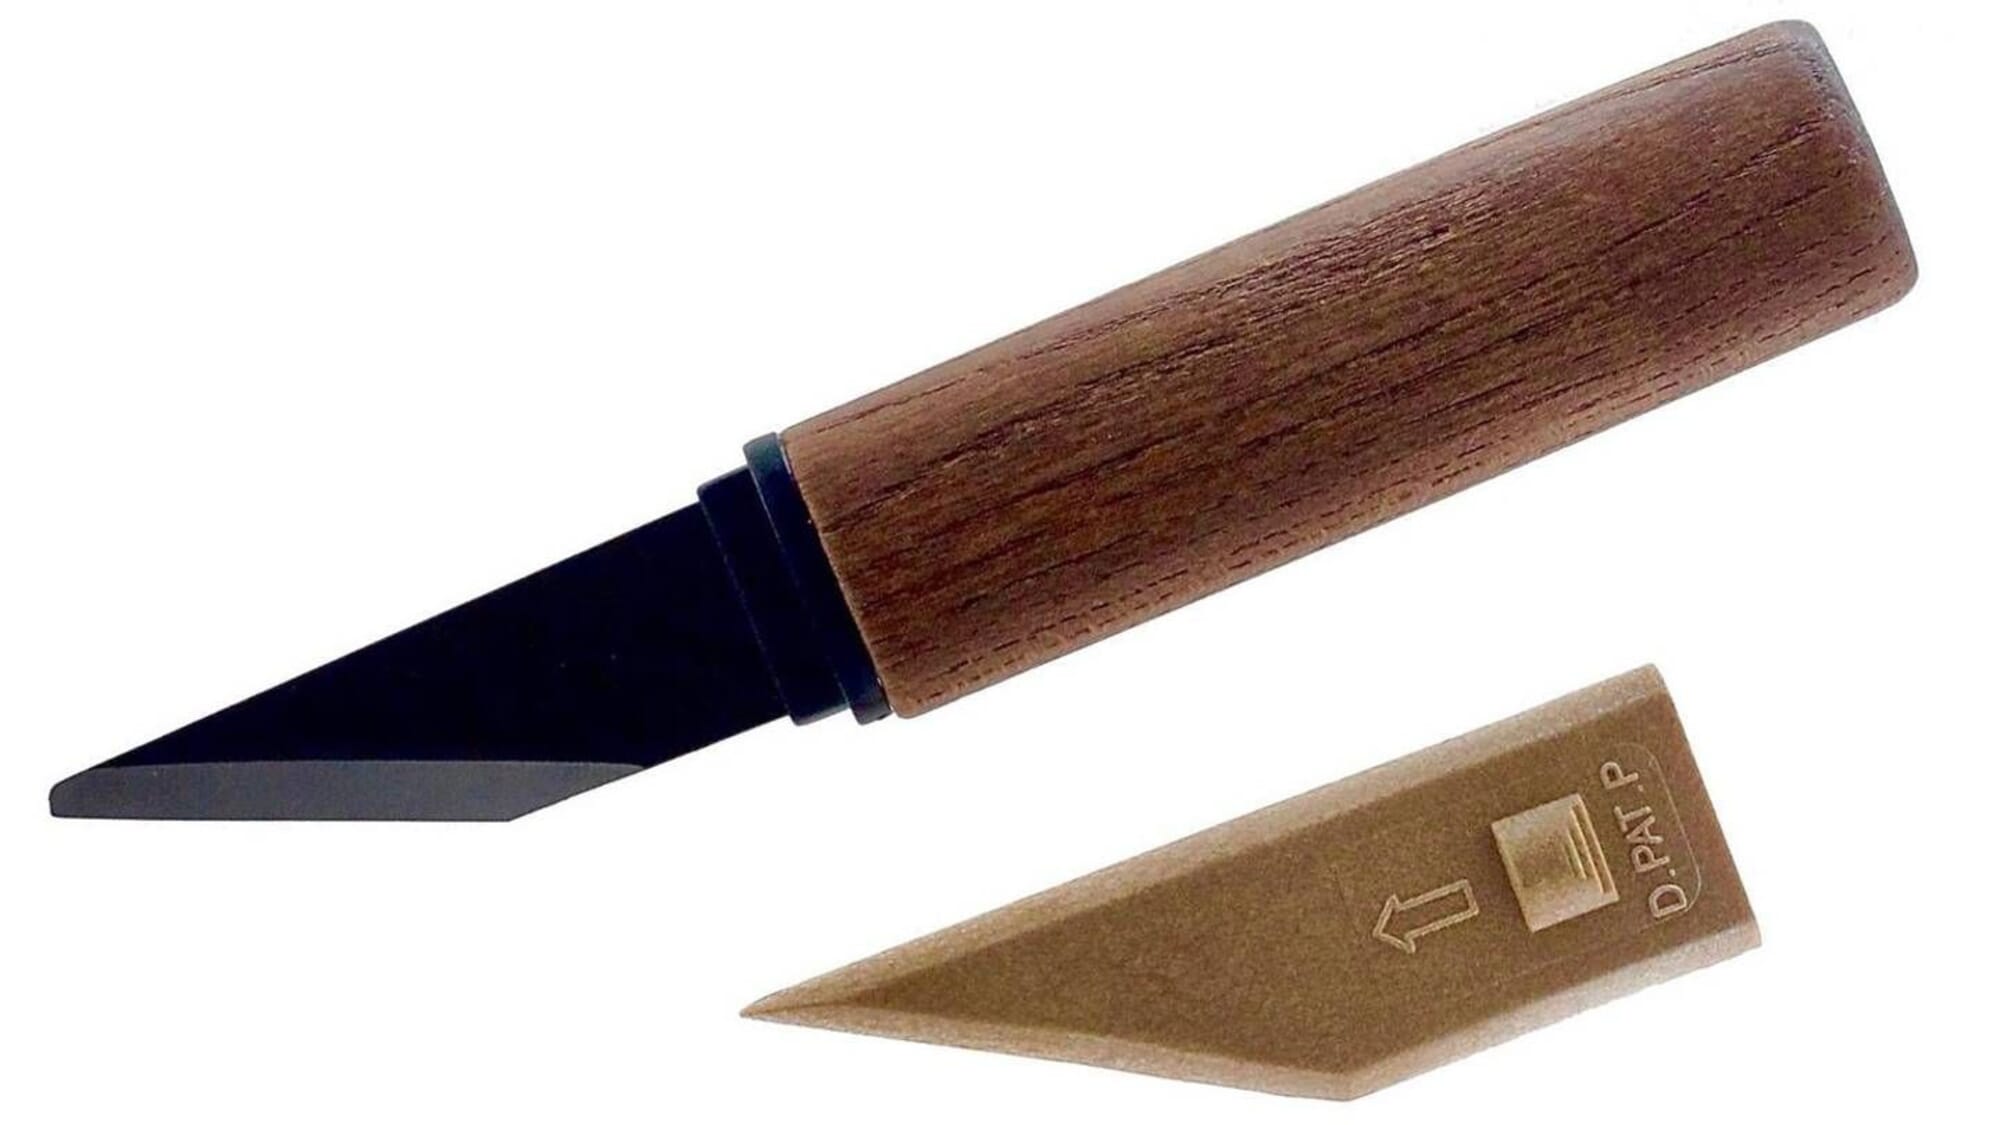 Suncraft Southpaw Japanese Wood Carving Tool Whittling Knife Left Handed 34mm